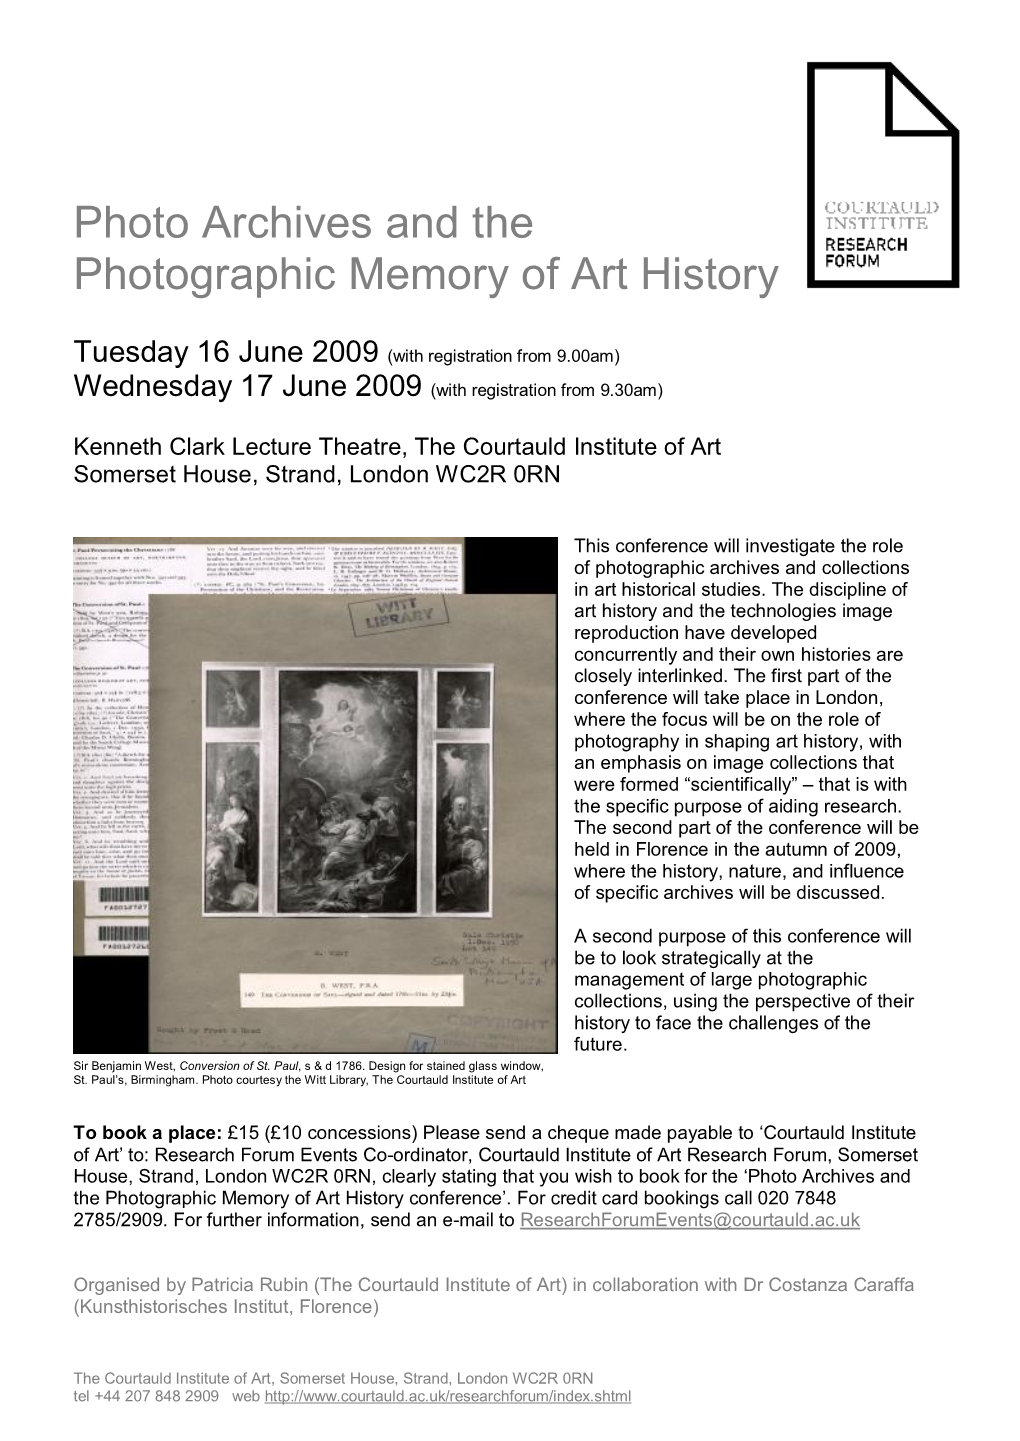 Photo Archives and the Photographic Memory of Art History